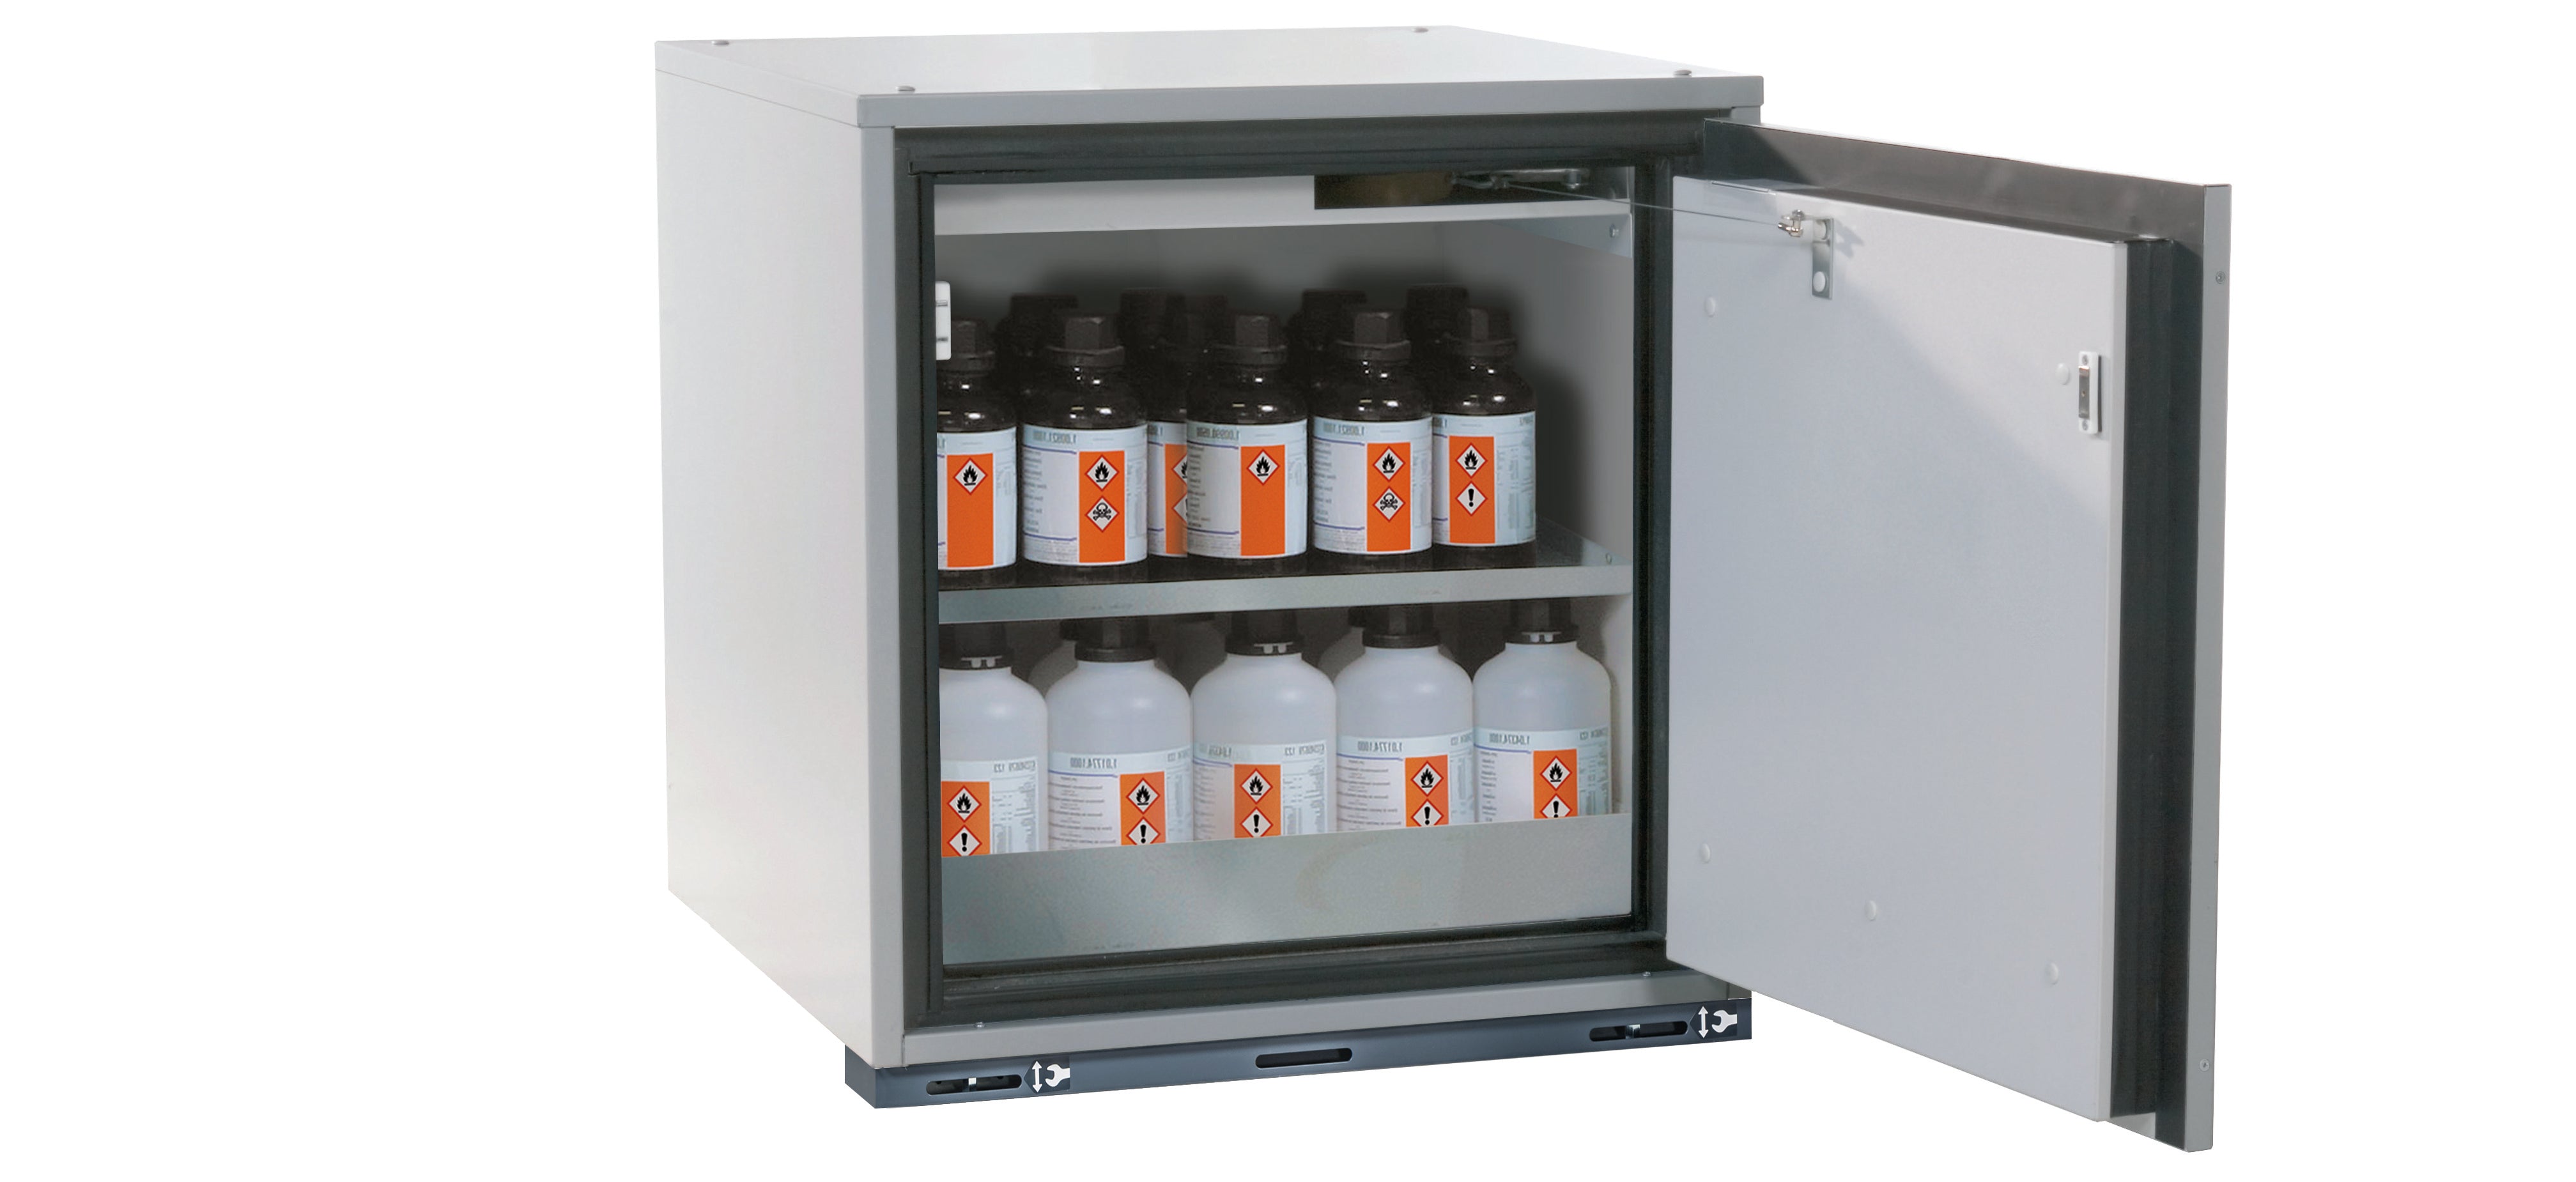 Type 90 safety base cabinet UB-T-90 model UB90.060.059.TR in light gray RAL 7035 with 1x standard shelf (stainless steel 1.4301)